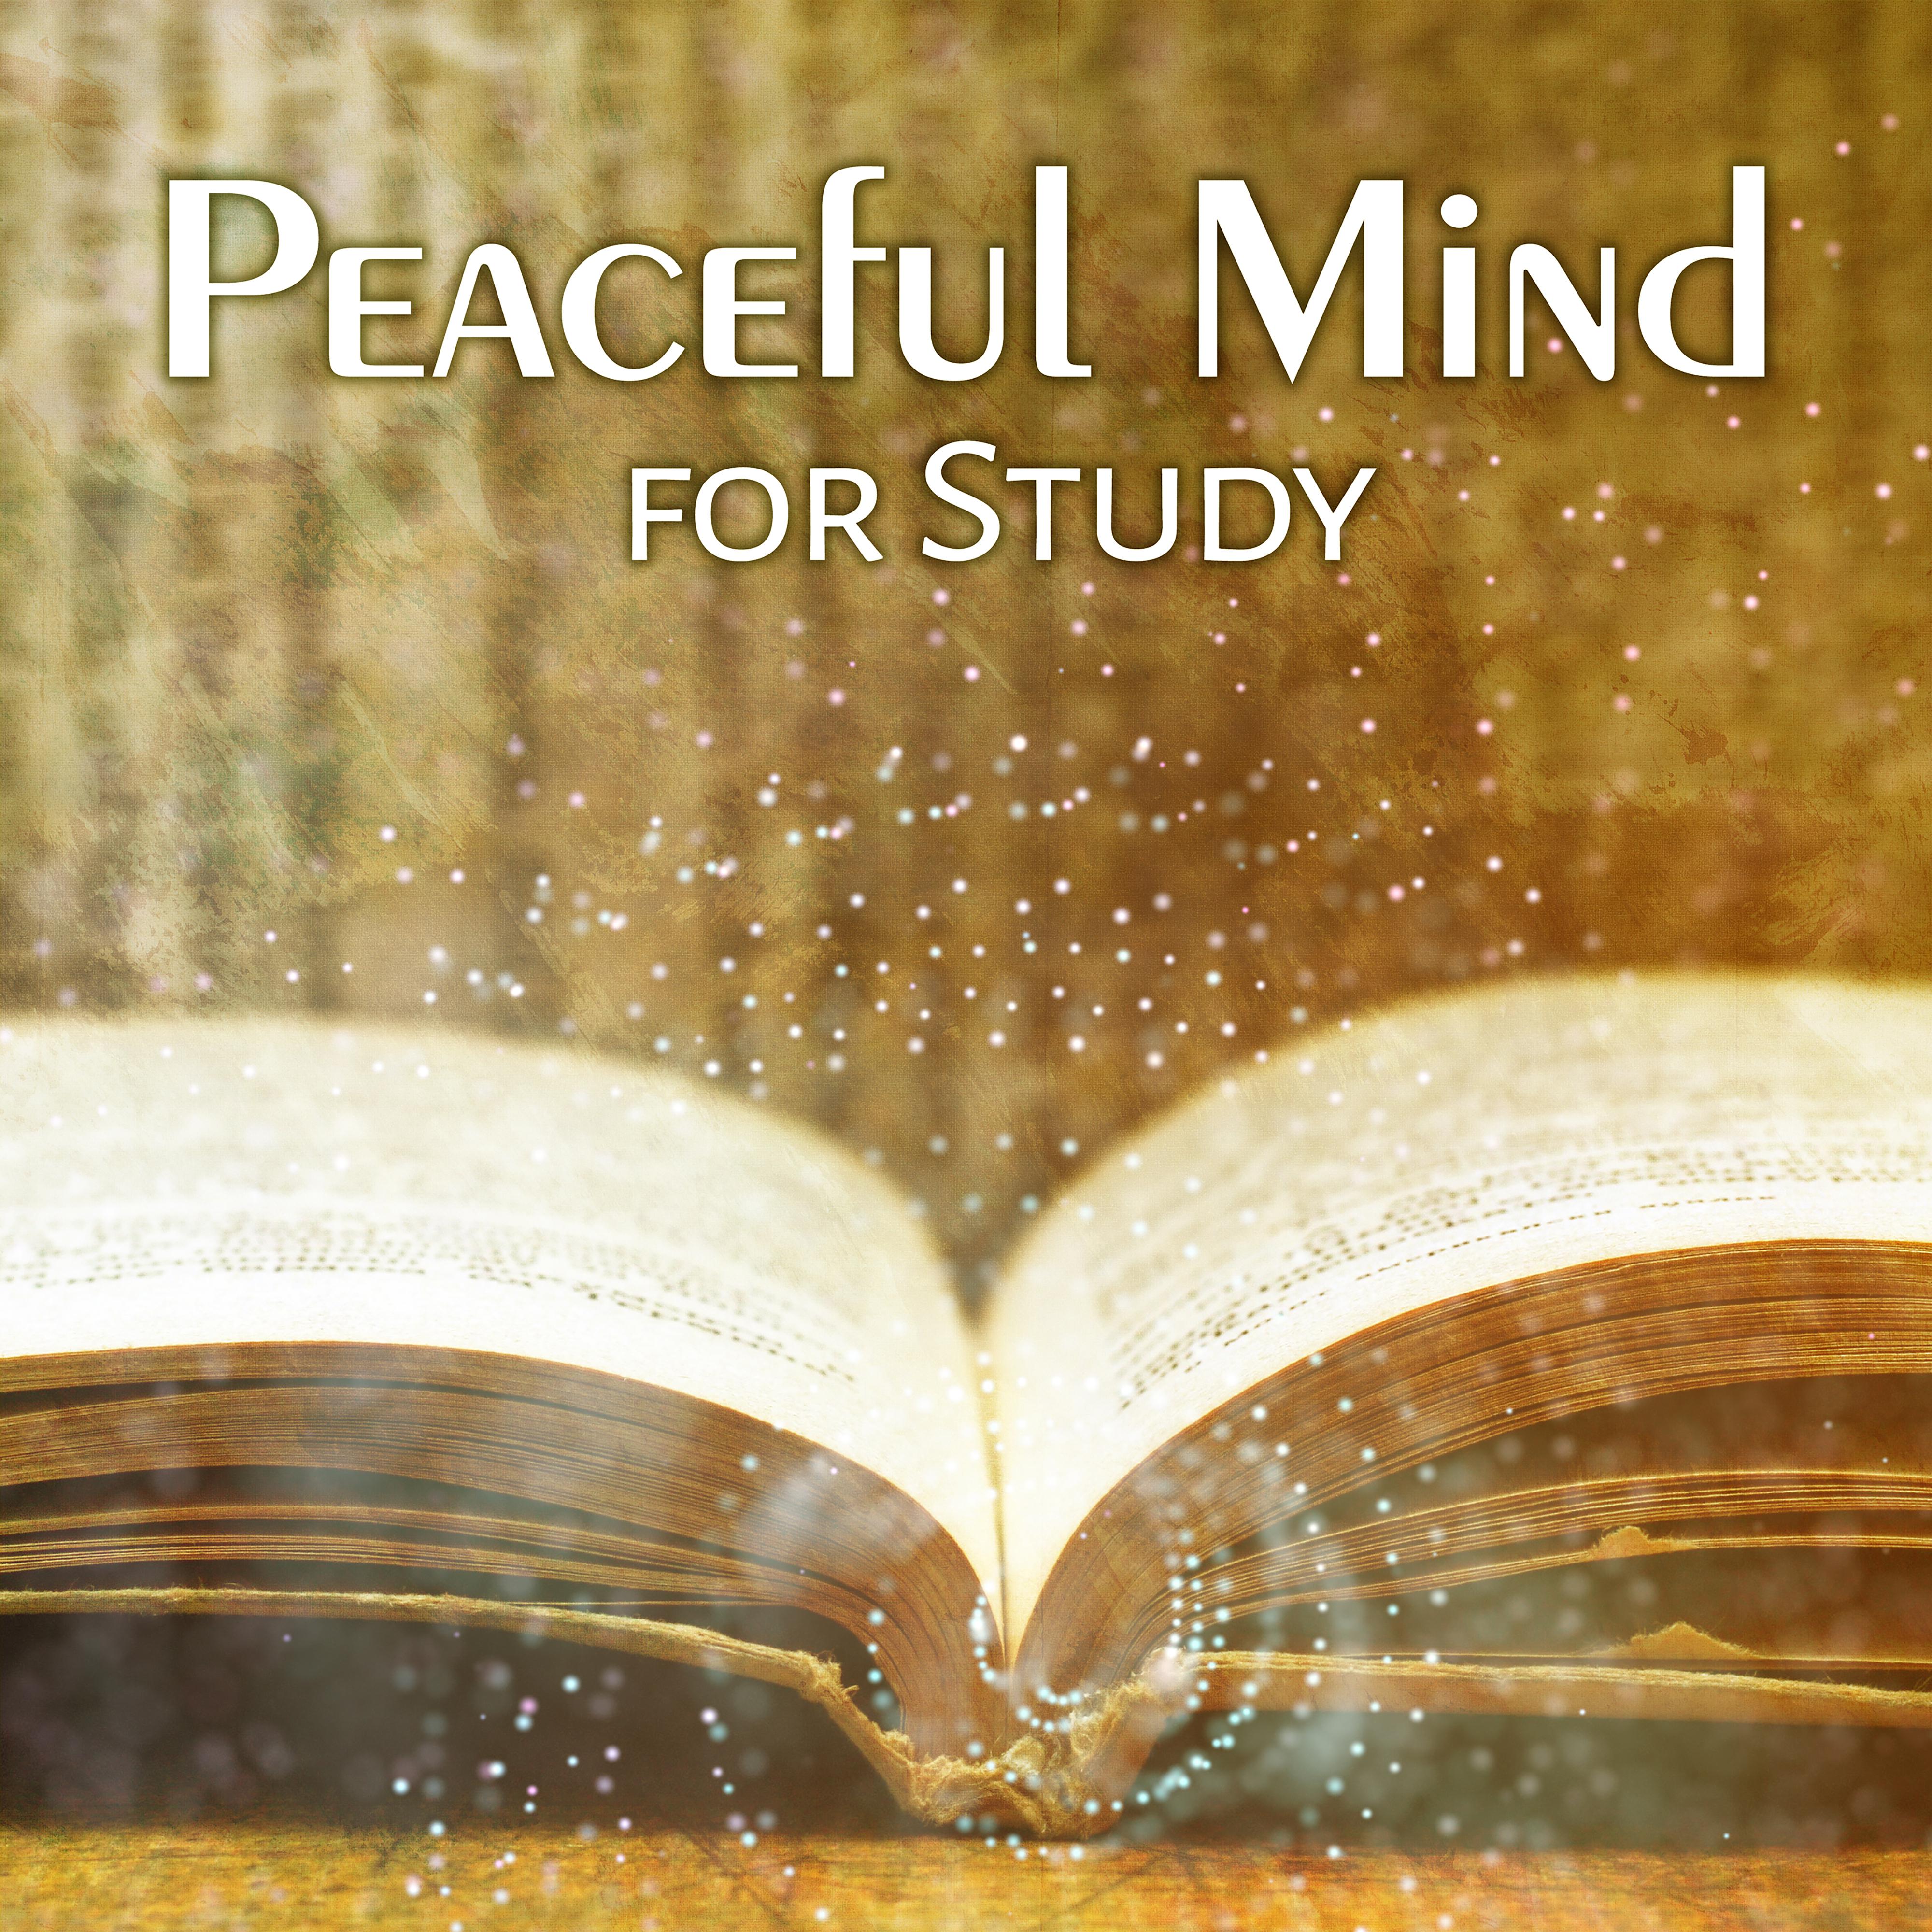 Peaceful Mind for Study  Deep Focus, Calming Music for Learning, Pure Mind, Nature Sounds, Calm Waves, Free Birds, Better Memory